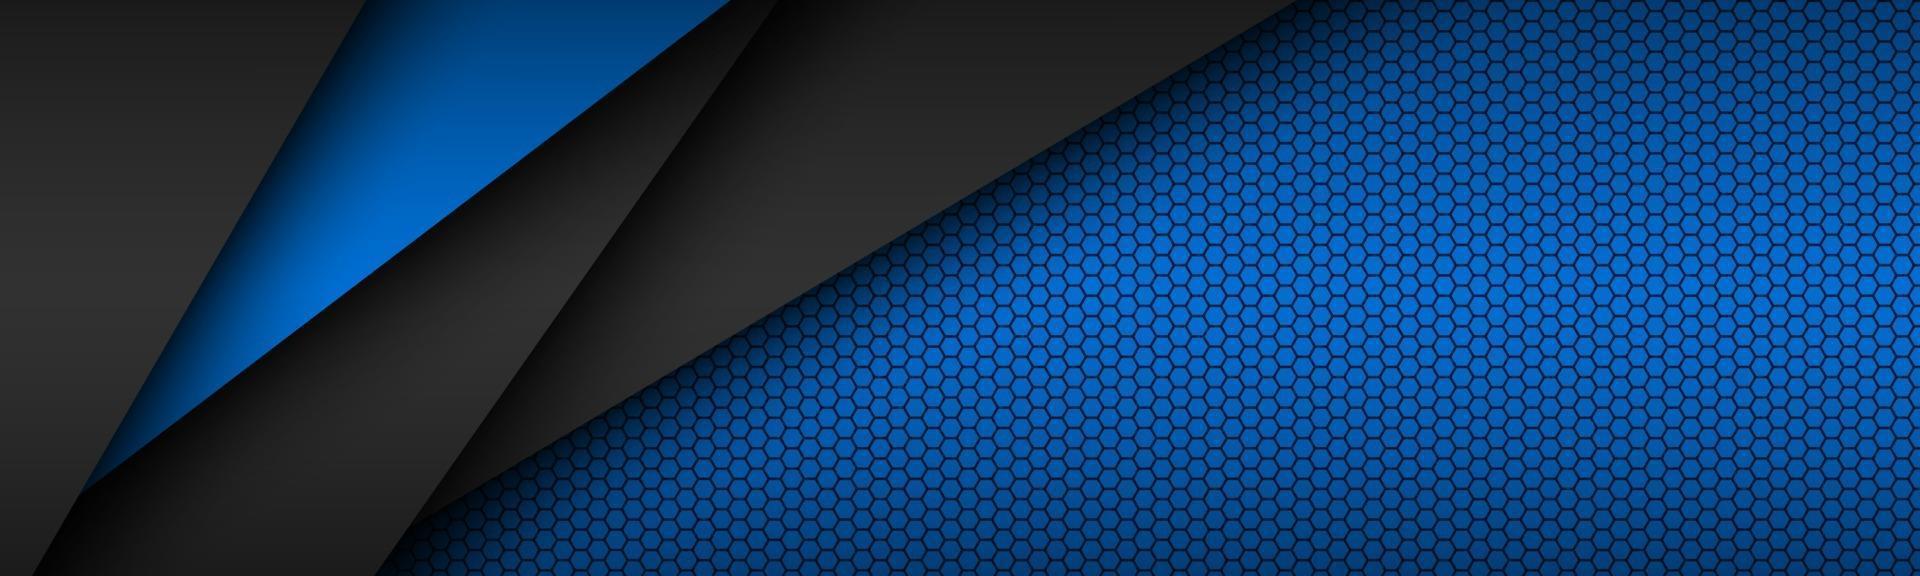 Black and blue layers above each other header Modern material design with a hexagonal pattern Vector abstract widescreen banner